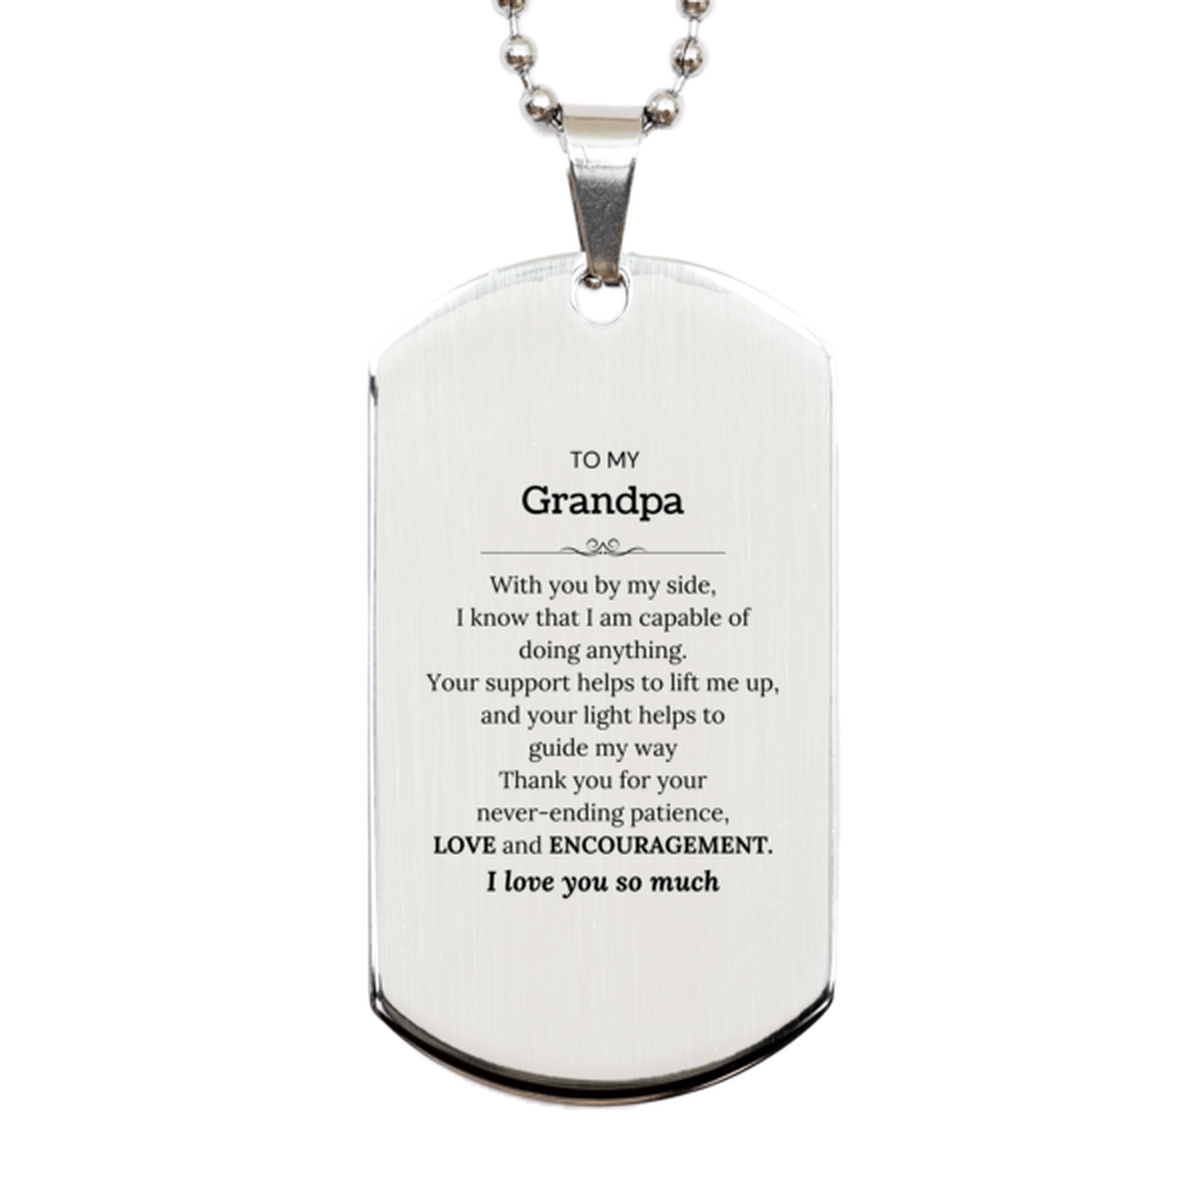 Appreciation Grandpa Silver Dog Tag Gifts, To My Grandpa Birthday Christmas Wedding Keepsake Gifts for Grandpa With you by my side, I know that I am capable of doing anything. I love you so much